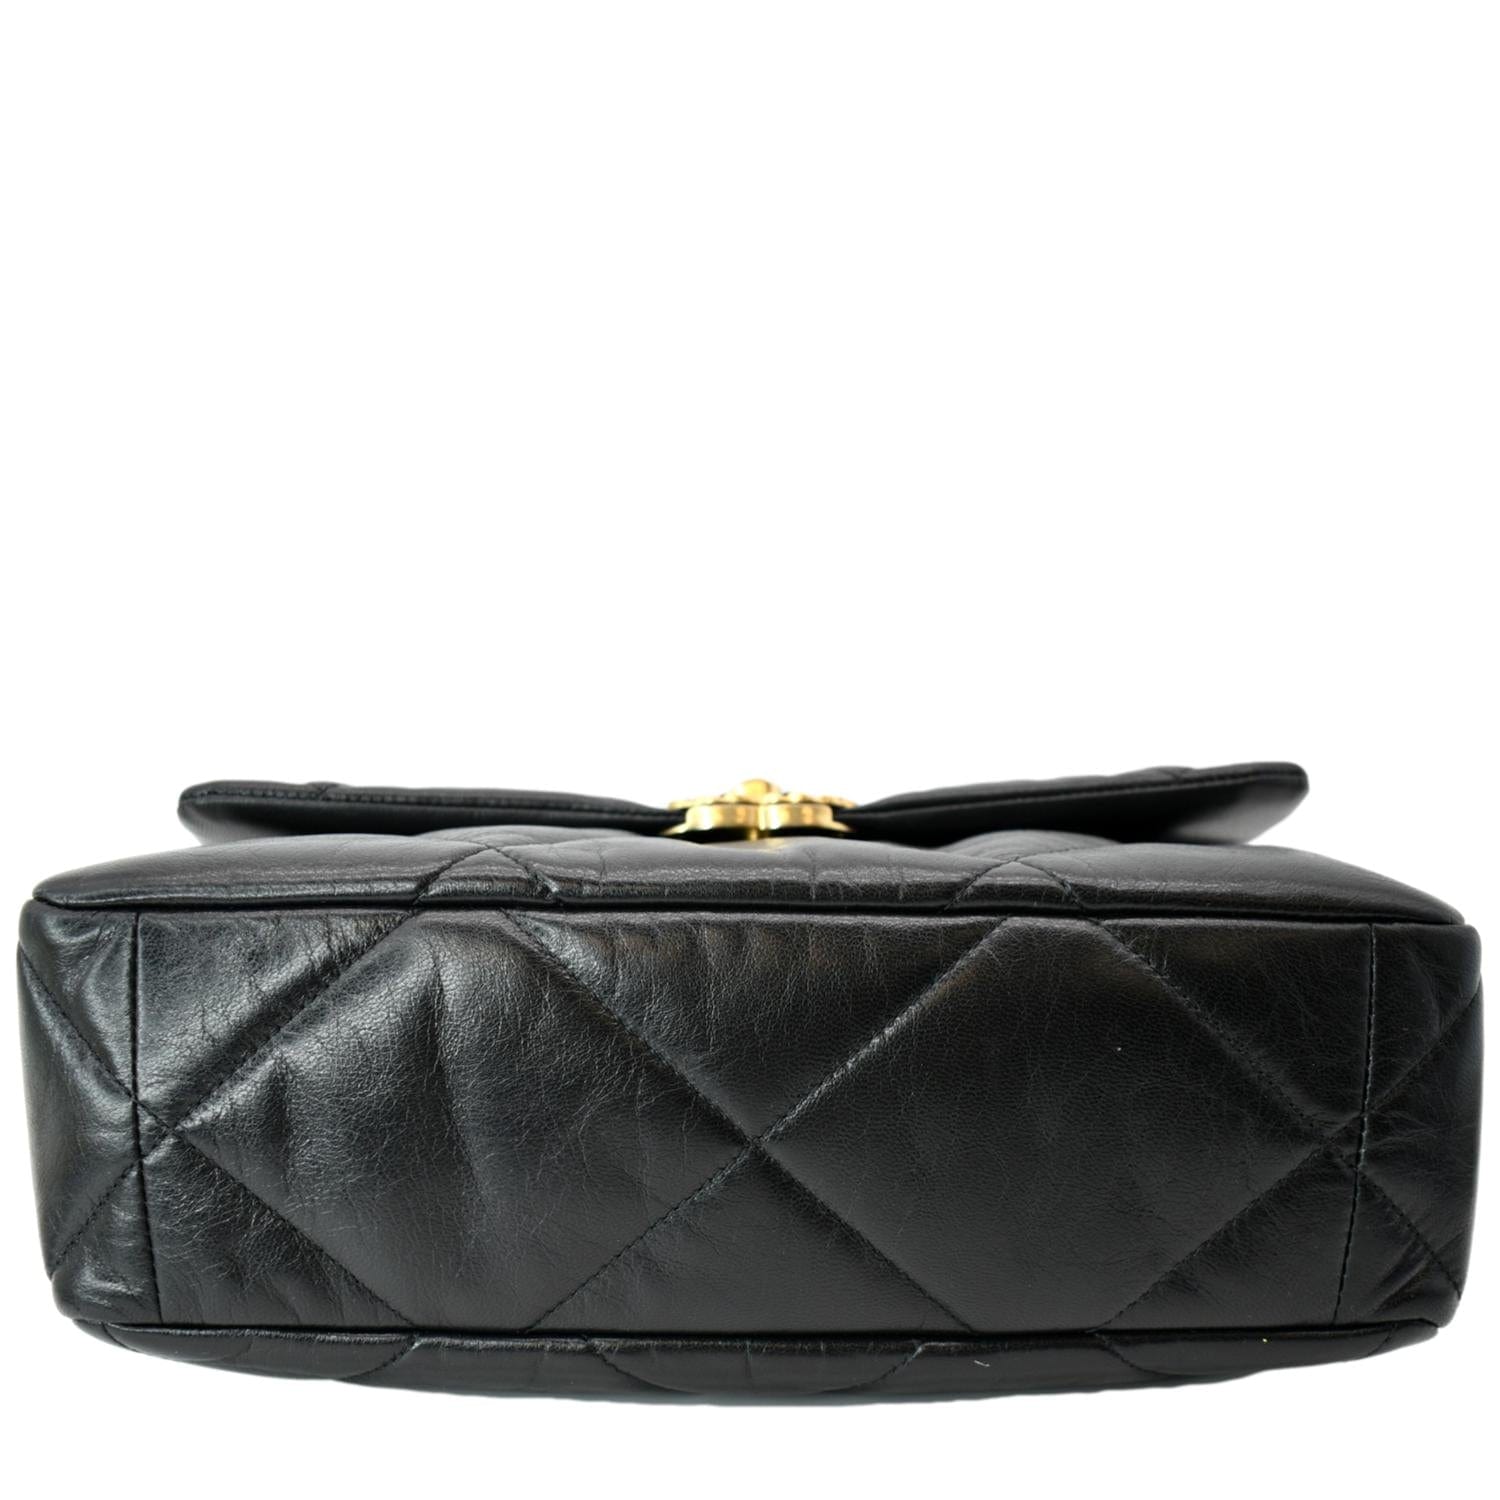 Chanel Black Lambskin Quilted Leather Chanel 19 O Case Clutch Bag